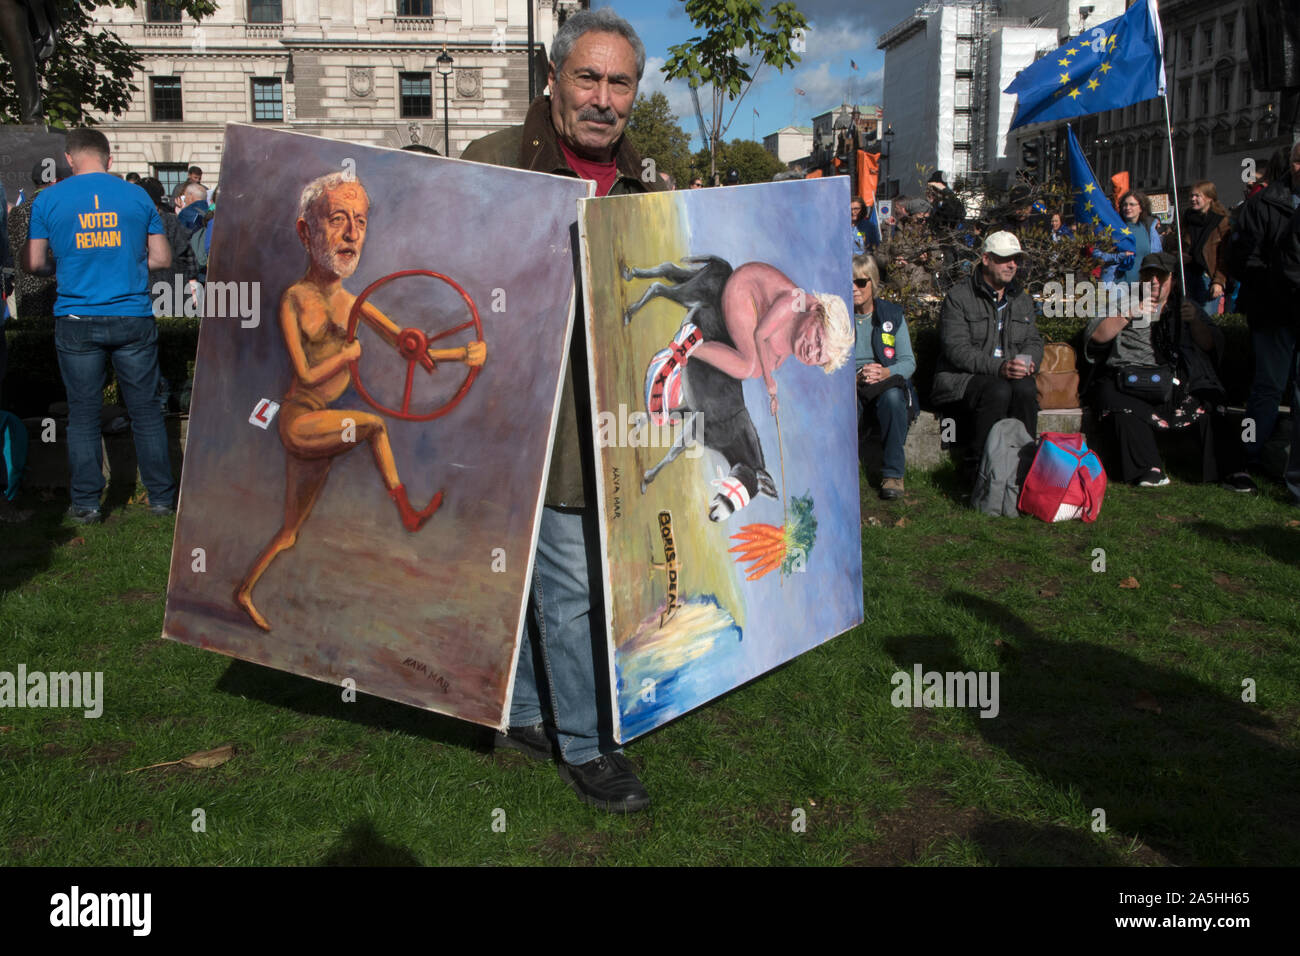 Kaya Mar Turkish artist political cartoonist with his paintings of Jeremy Corbyn and Boris Johnson. 2019 London UK. Rally in Parliament Square for Peoples Vote Campaign. 2010s UK HOMER SYKES Stock Photo